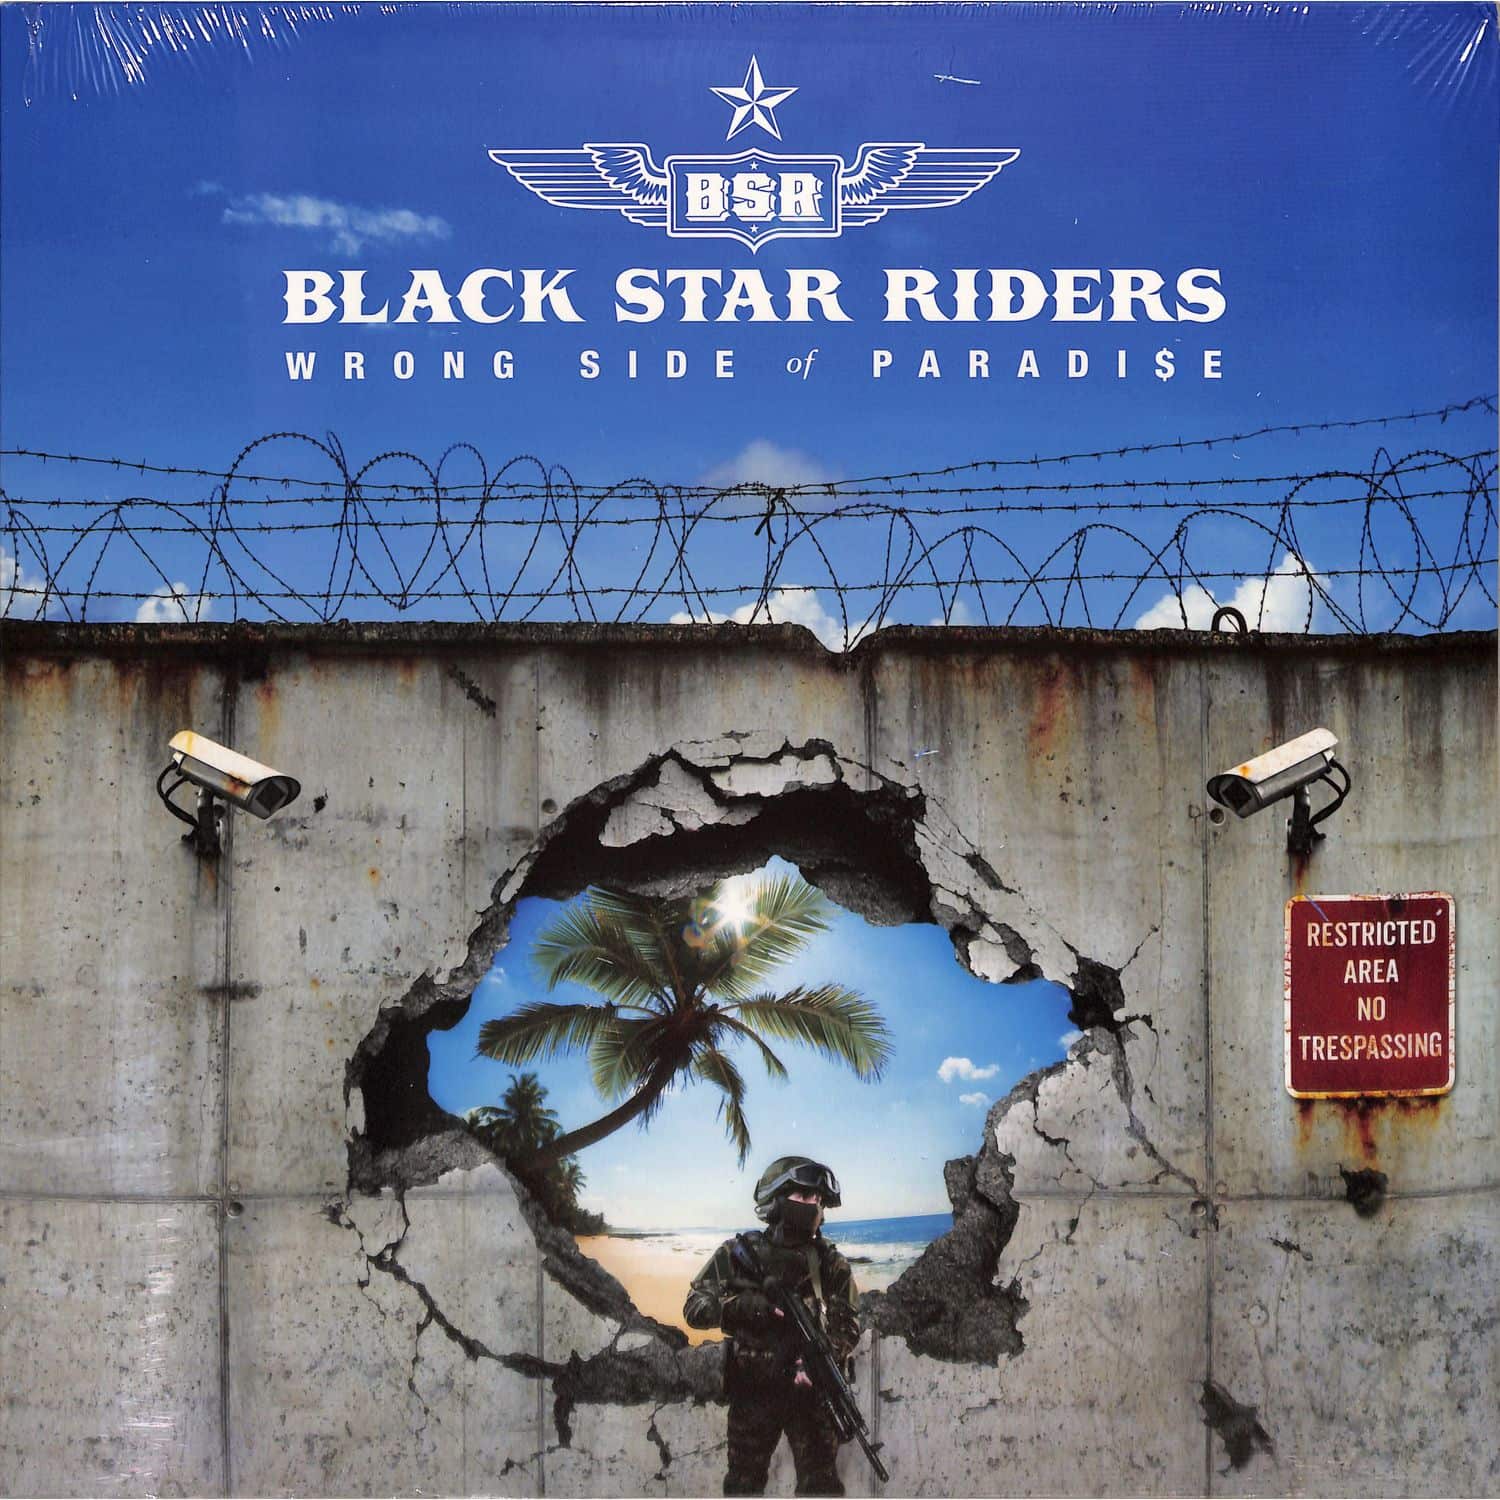 Black Star Riders - WRONG SIDE OF PARADISE 